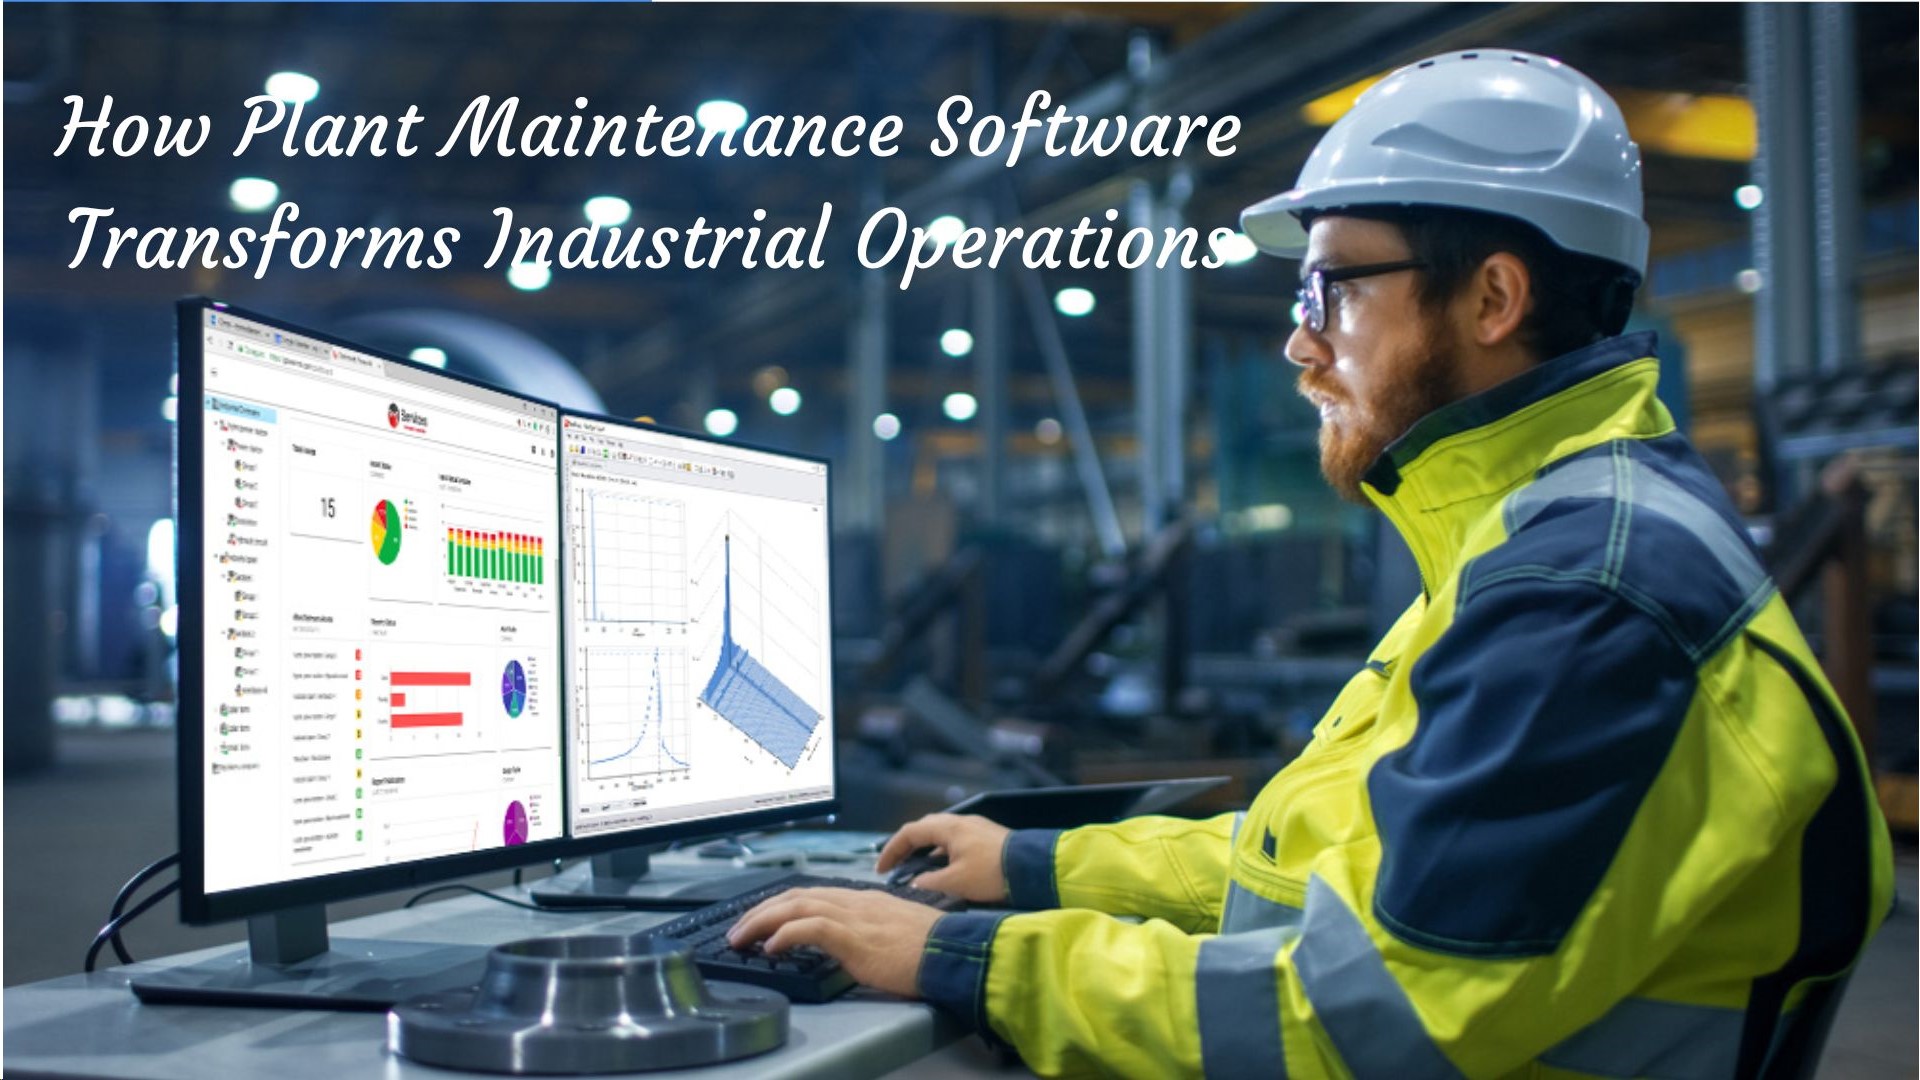 How Plant Maintenance Software Transforms Industrial Operations